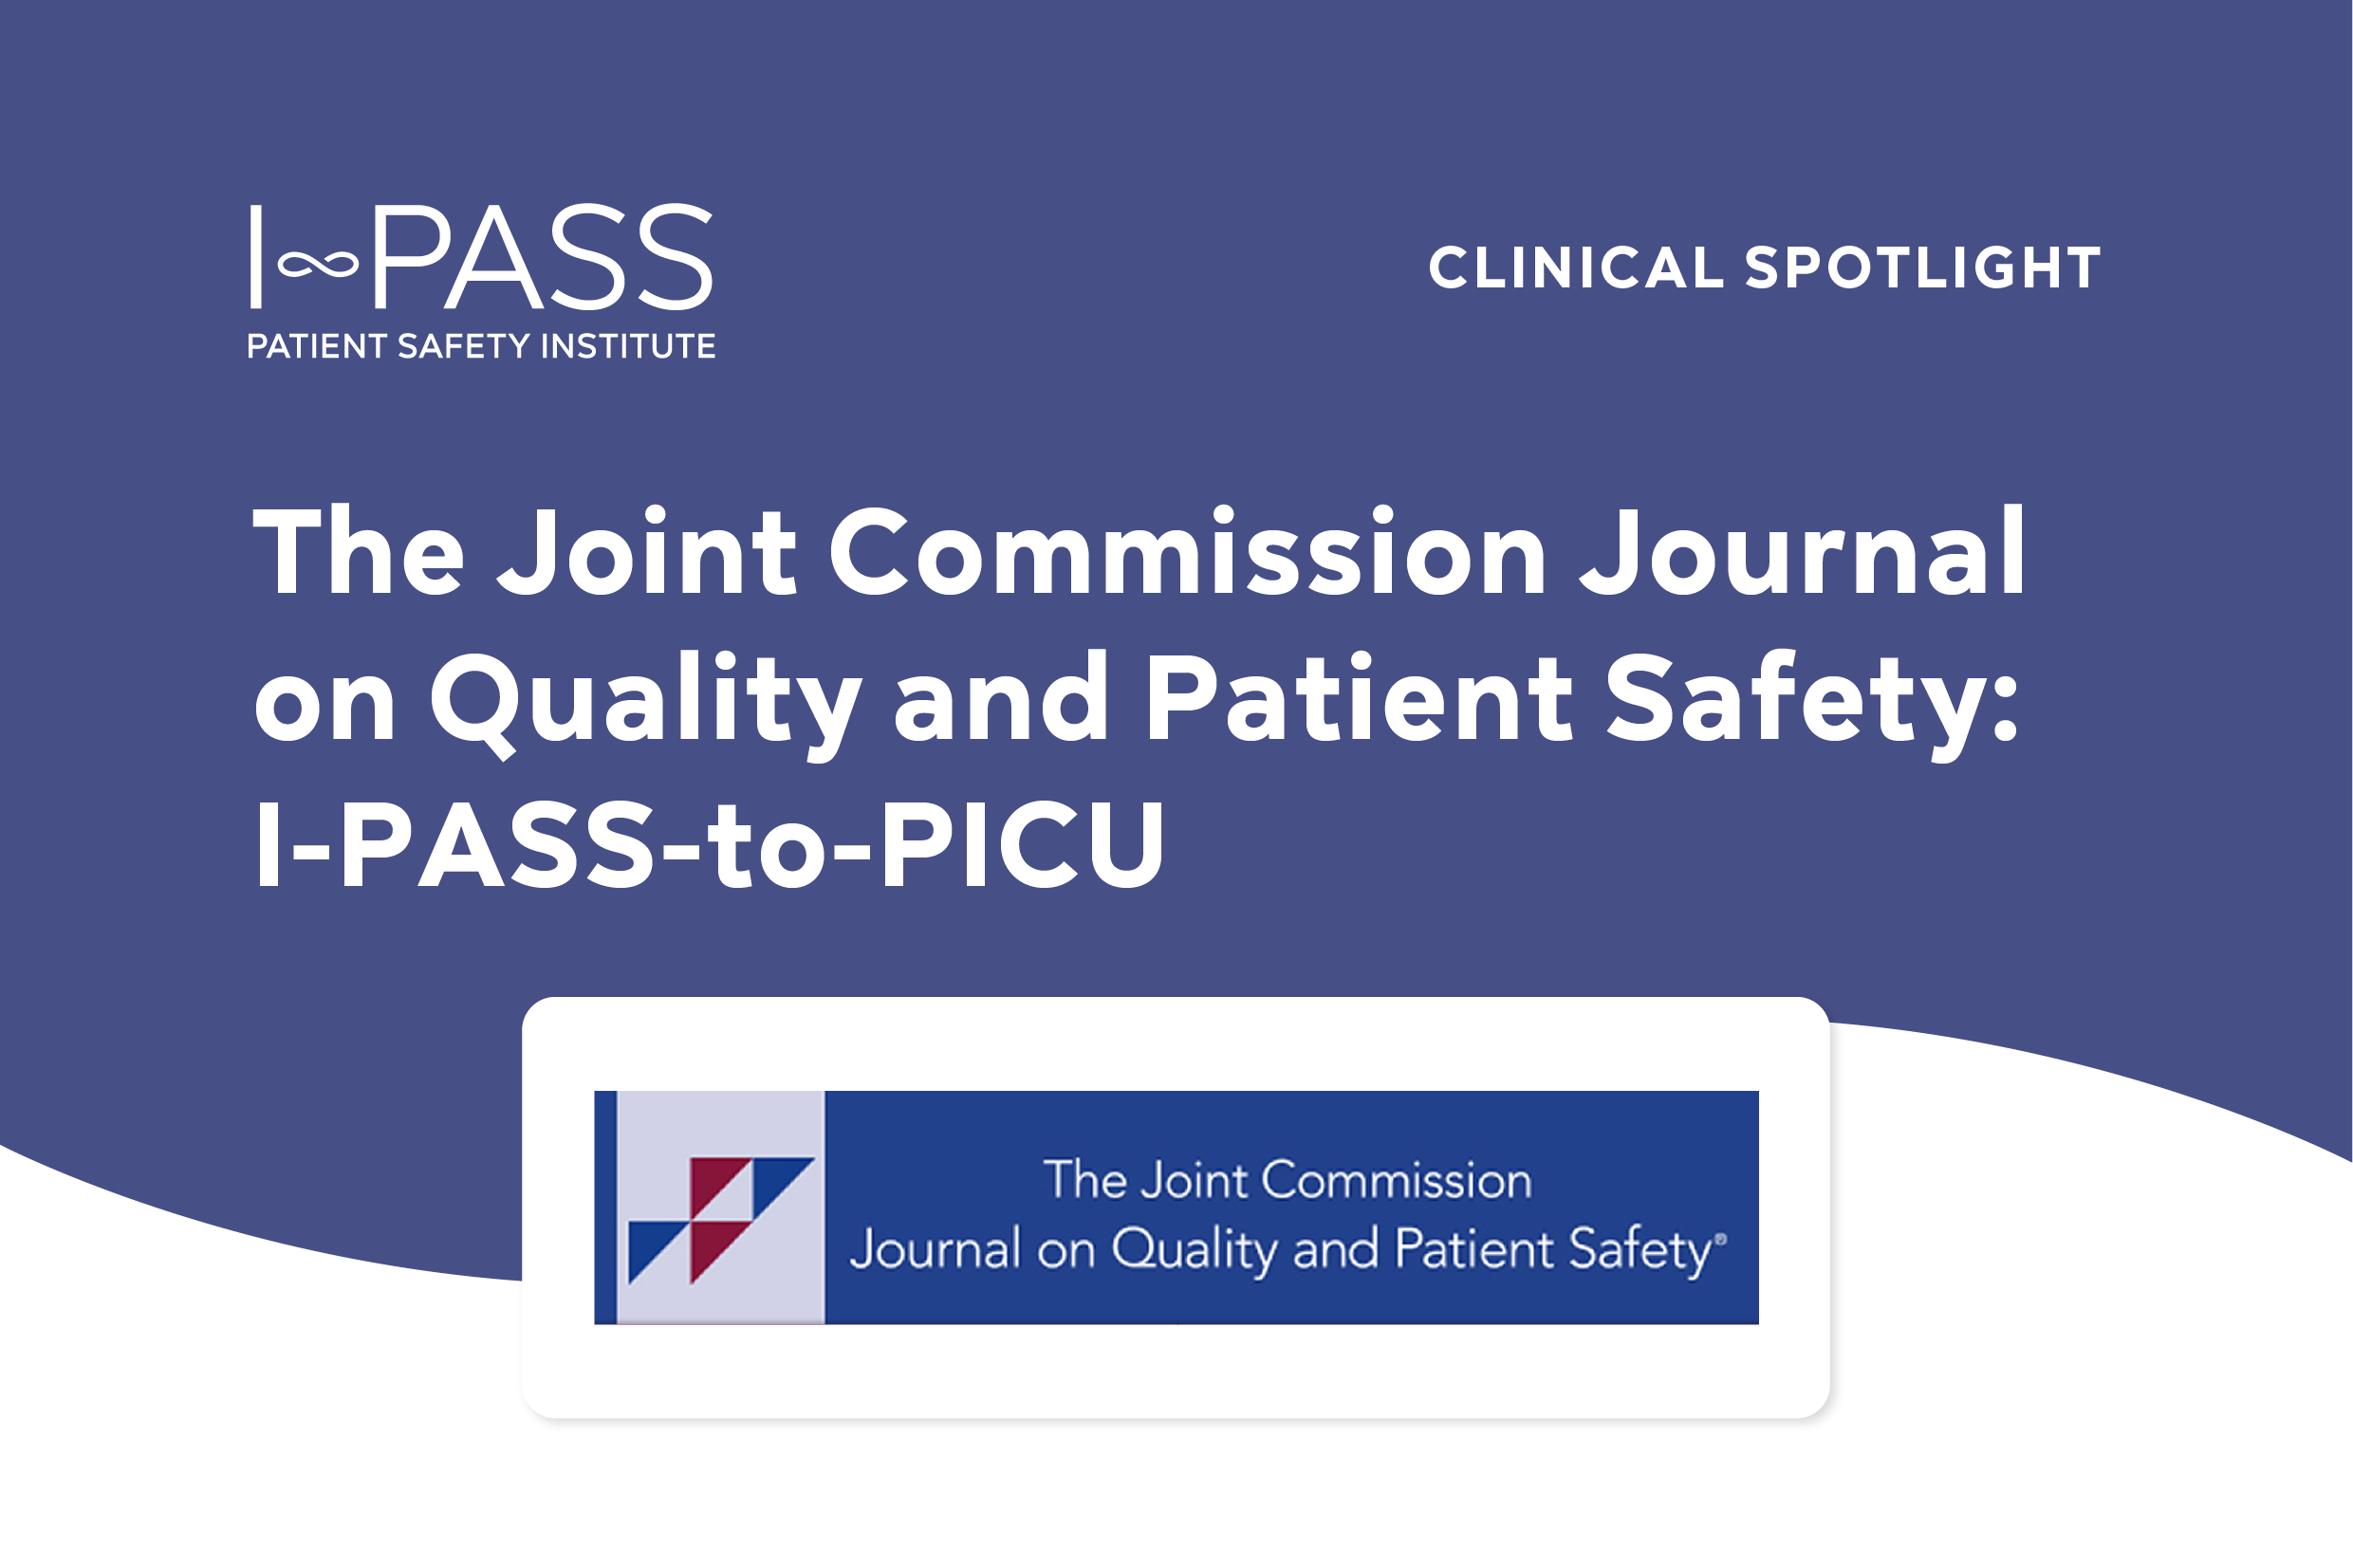 The Joint Commission Journal on Quality and Patient Safety—Development and Evaluation of I-PASS-to-PICU